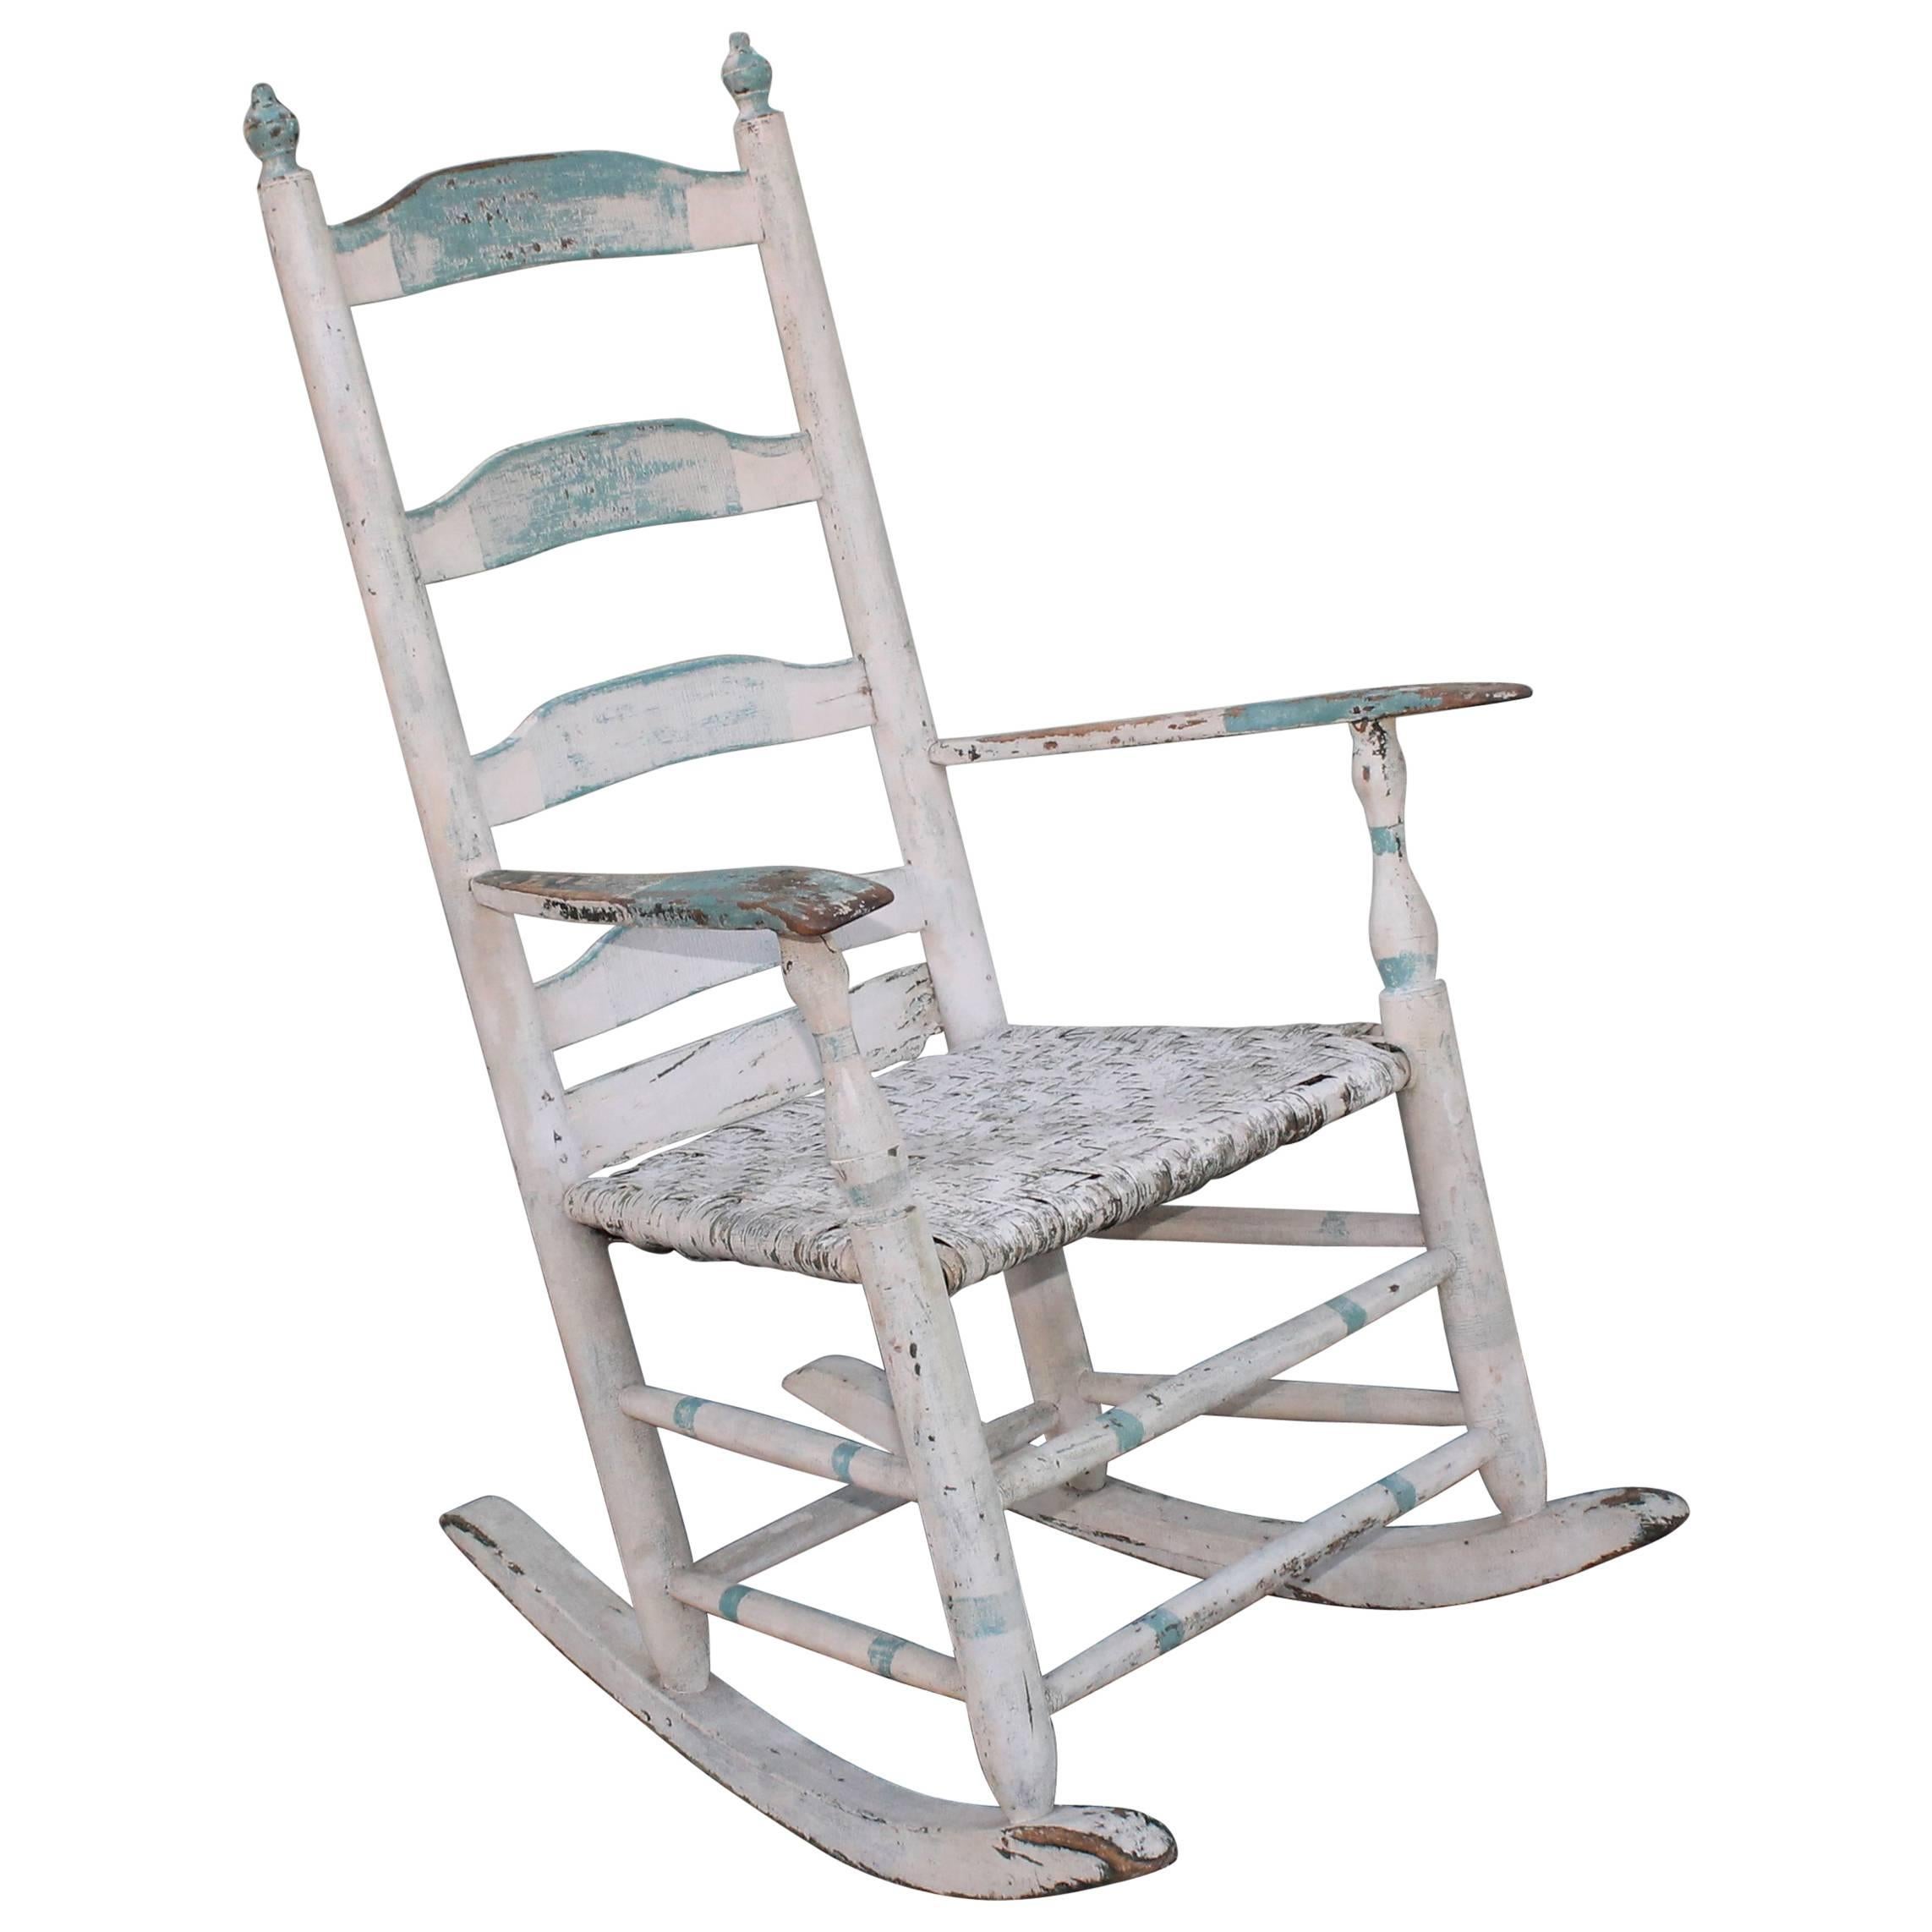 19th Century Original Blue and White Painted Rocking Chair